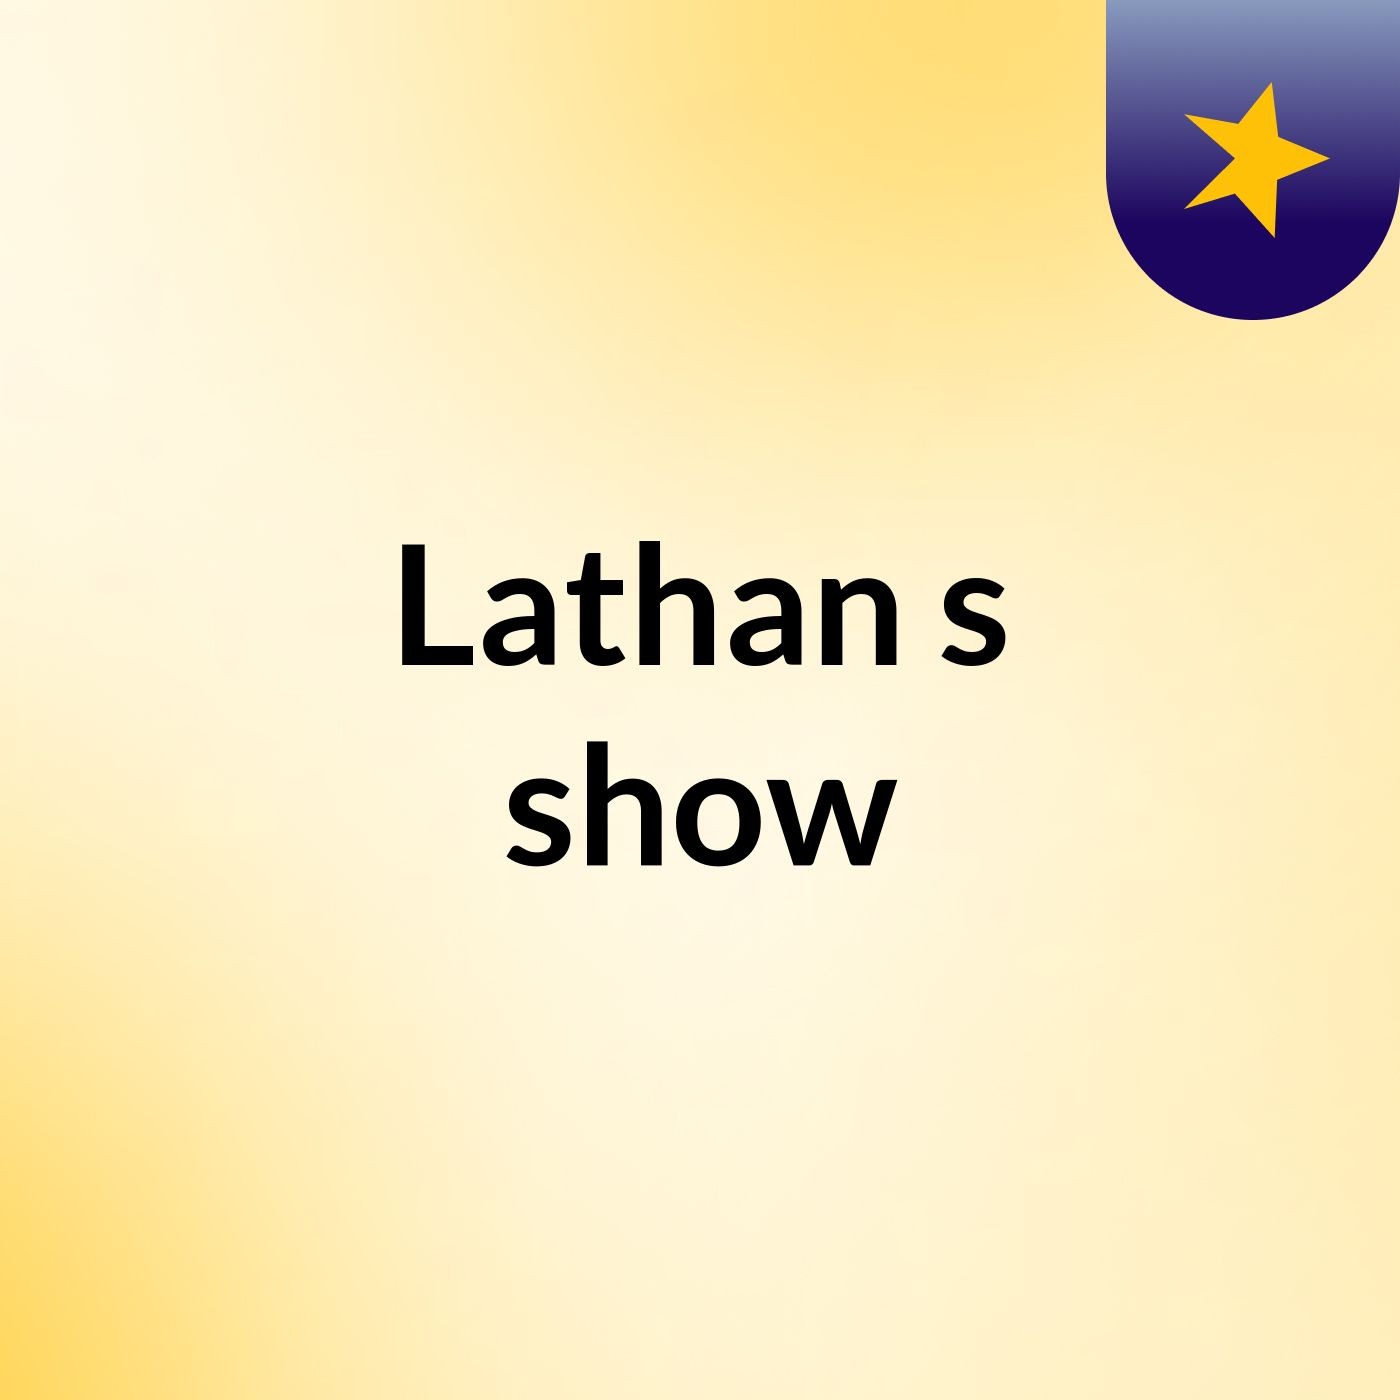 Lathan's show